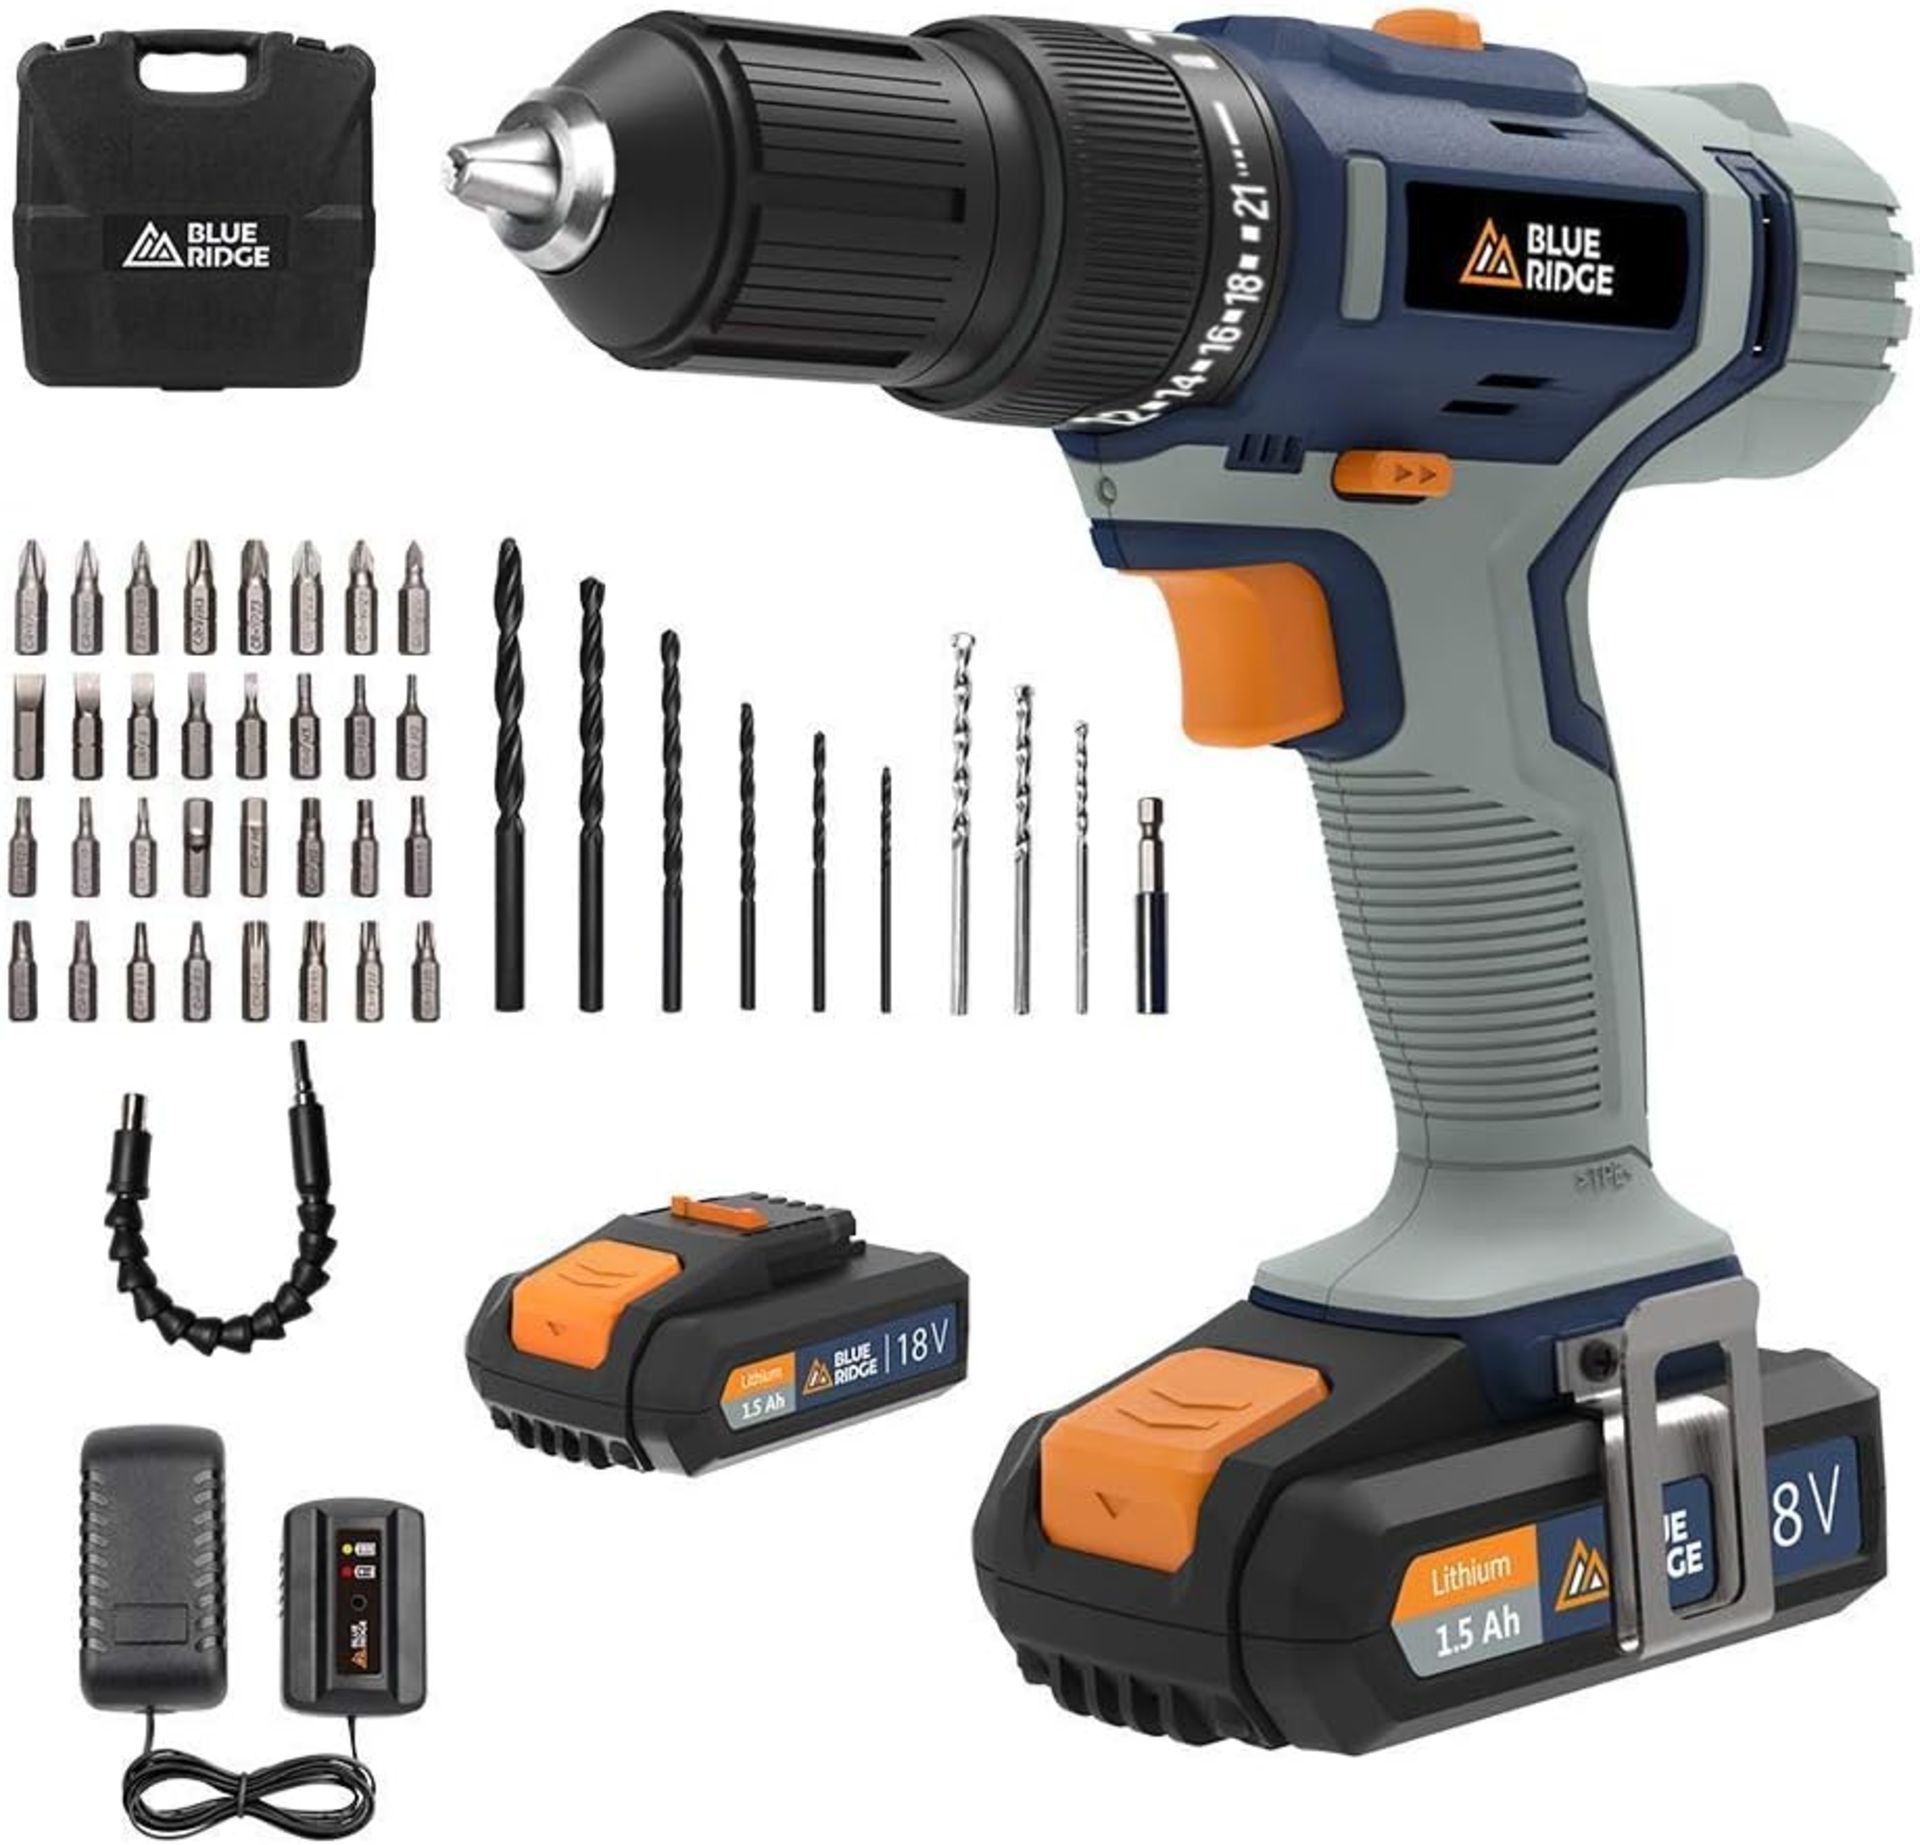 2x NEW & BOXED BLUE RIDGE 18V Cordless Hammer Drill with 2 x 1.5 Ah Li-ion Batteries & 43 Piece - Image 2 of 7